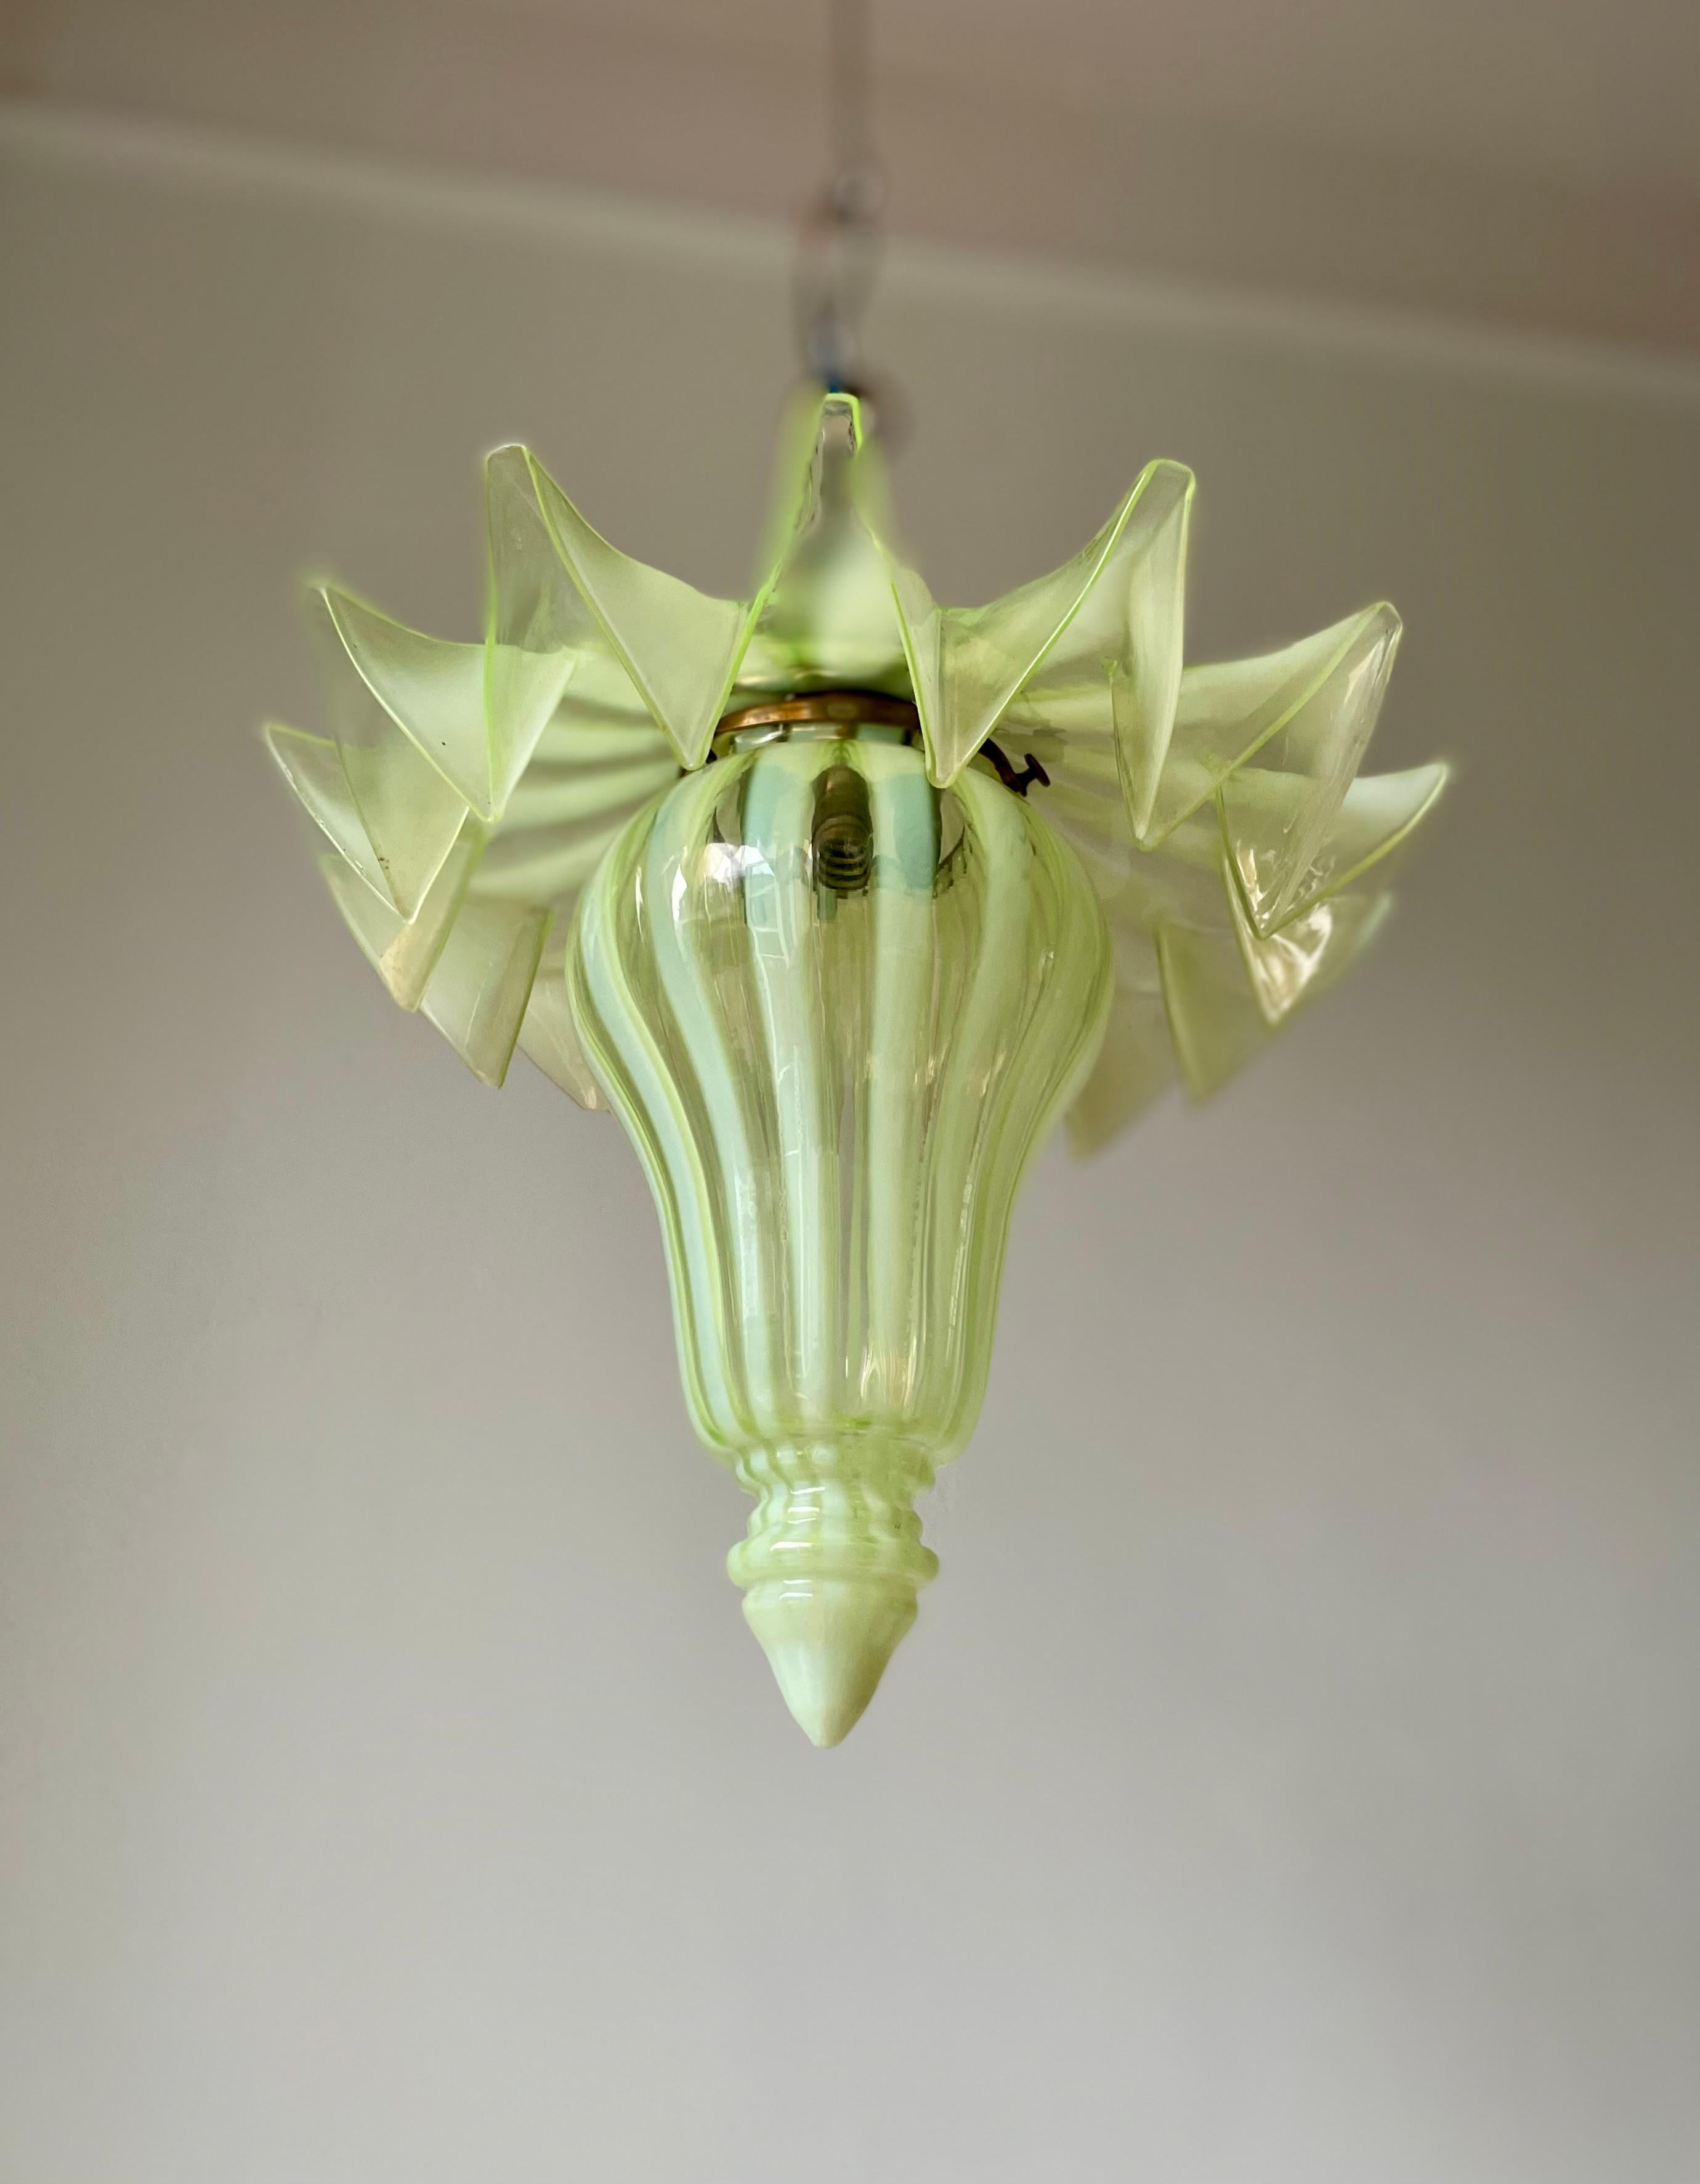 Remarkable antique mouthblown art glass pendant likely manufactured in France in the early 20th century.  Clear and light lime yellow stripes on broad flowing skirt placed over soft curved elongated base with pointed tip. Brass mount with small